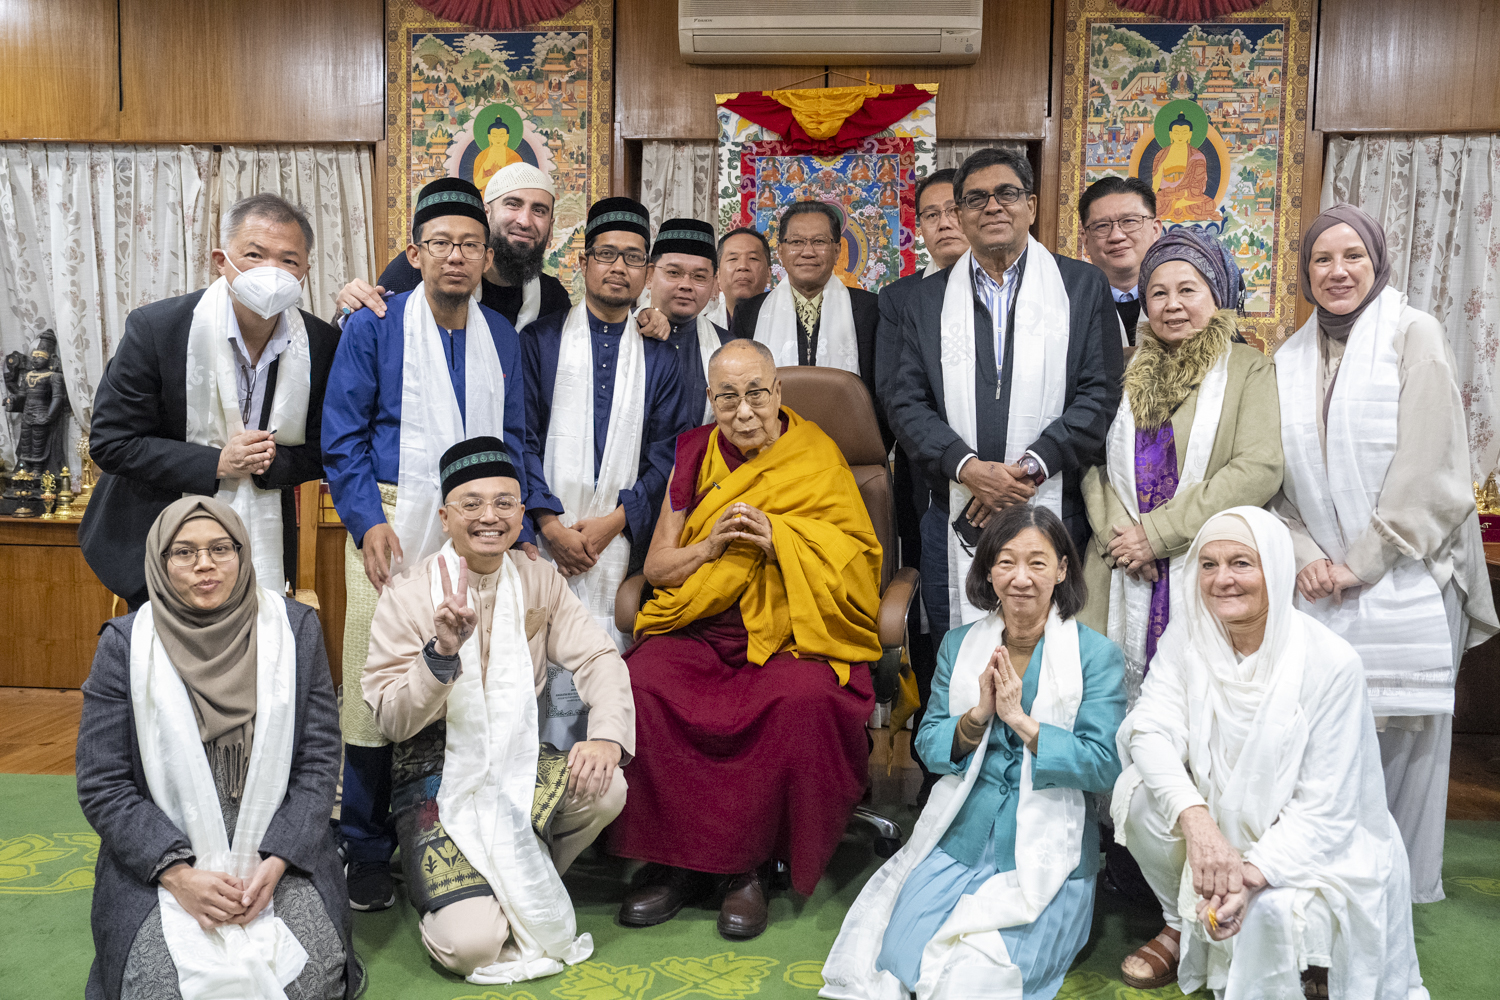 His Holiness the Dalai Lama with the Muslim scholars from Malaysia, Sweden, USA. Photo/Tenzin Choejor/OHHDL